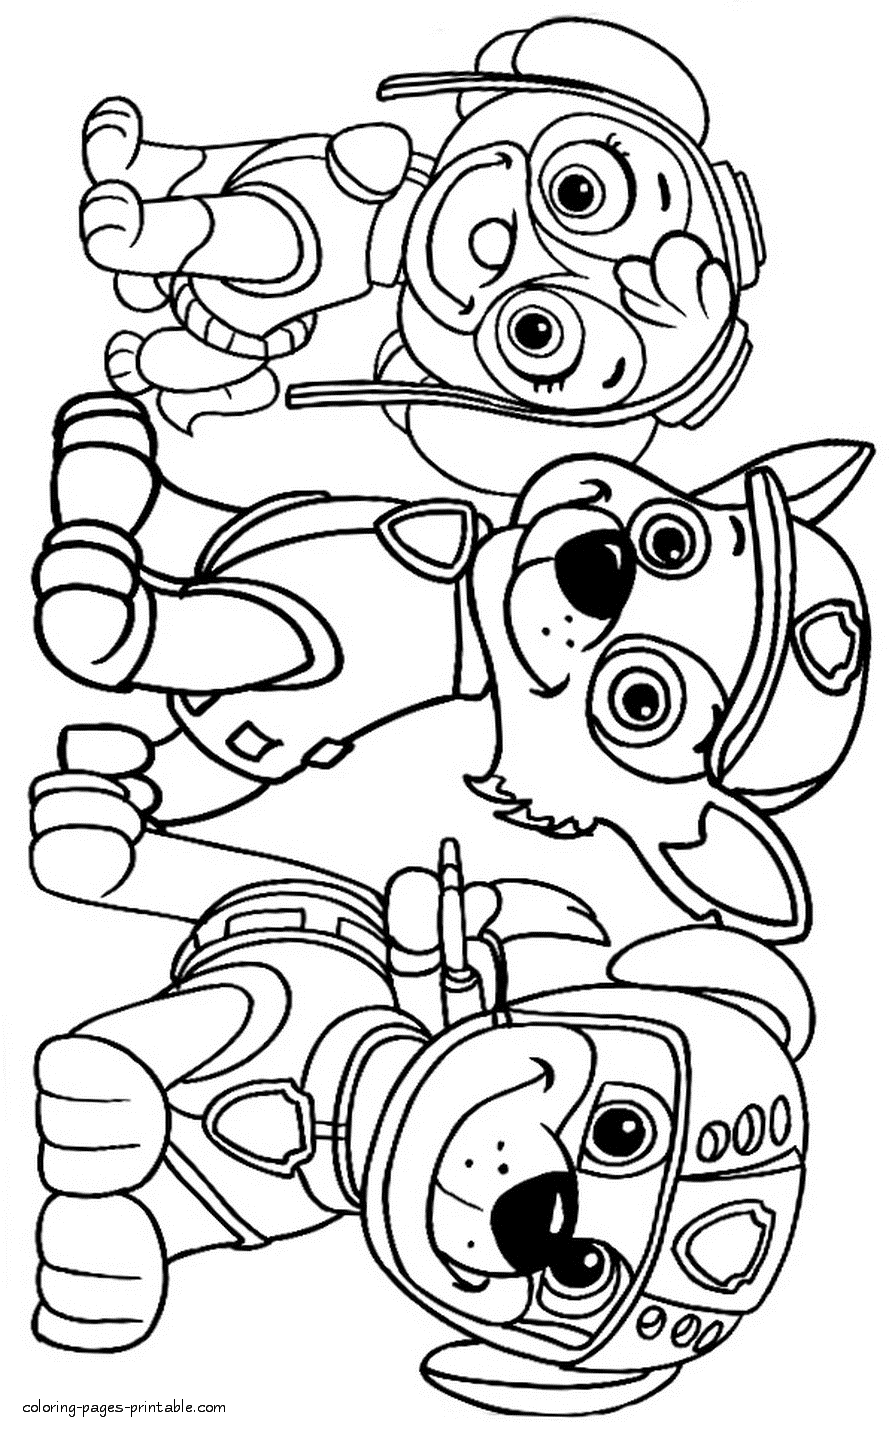 Download Free kids coloring pages Paw Patrol || COLORING-PAGES-PRINTABLE.COM